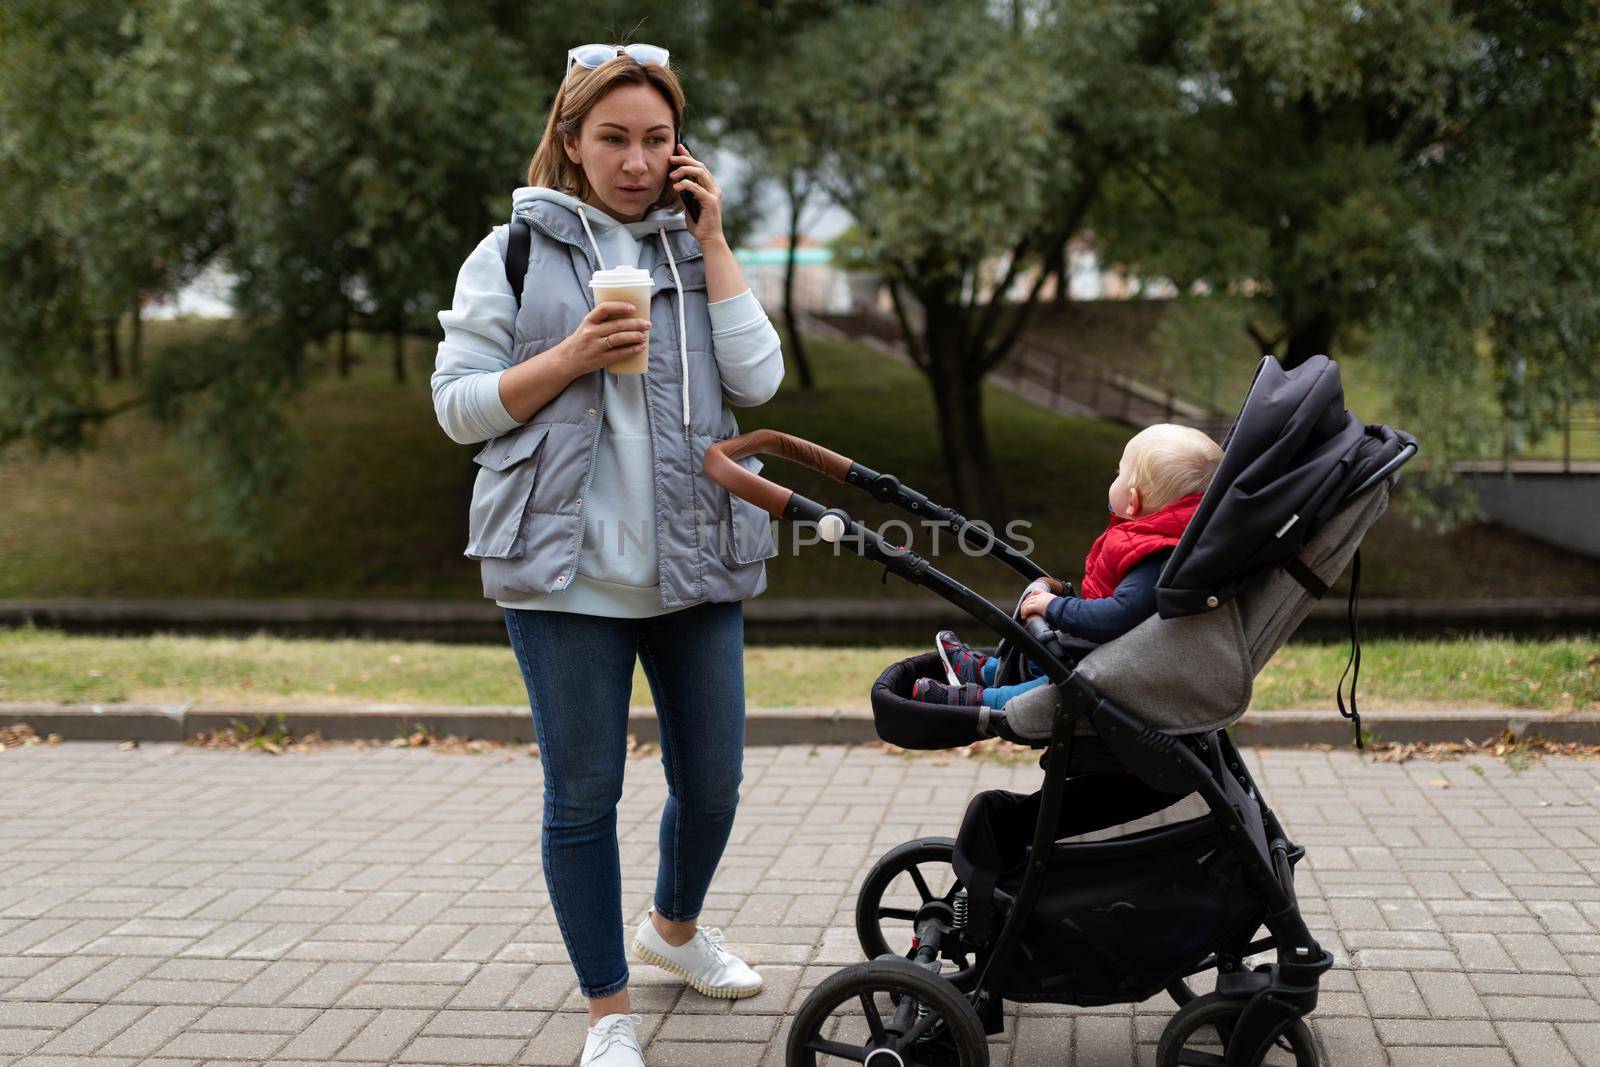 young woman while walking with her baby and pram talking on a mobile phone and drinking coffee in a city park.